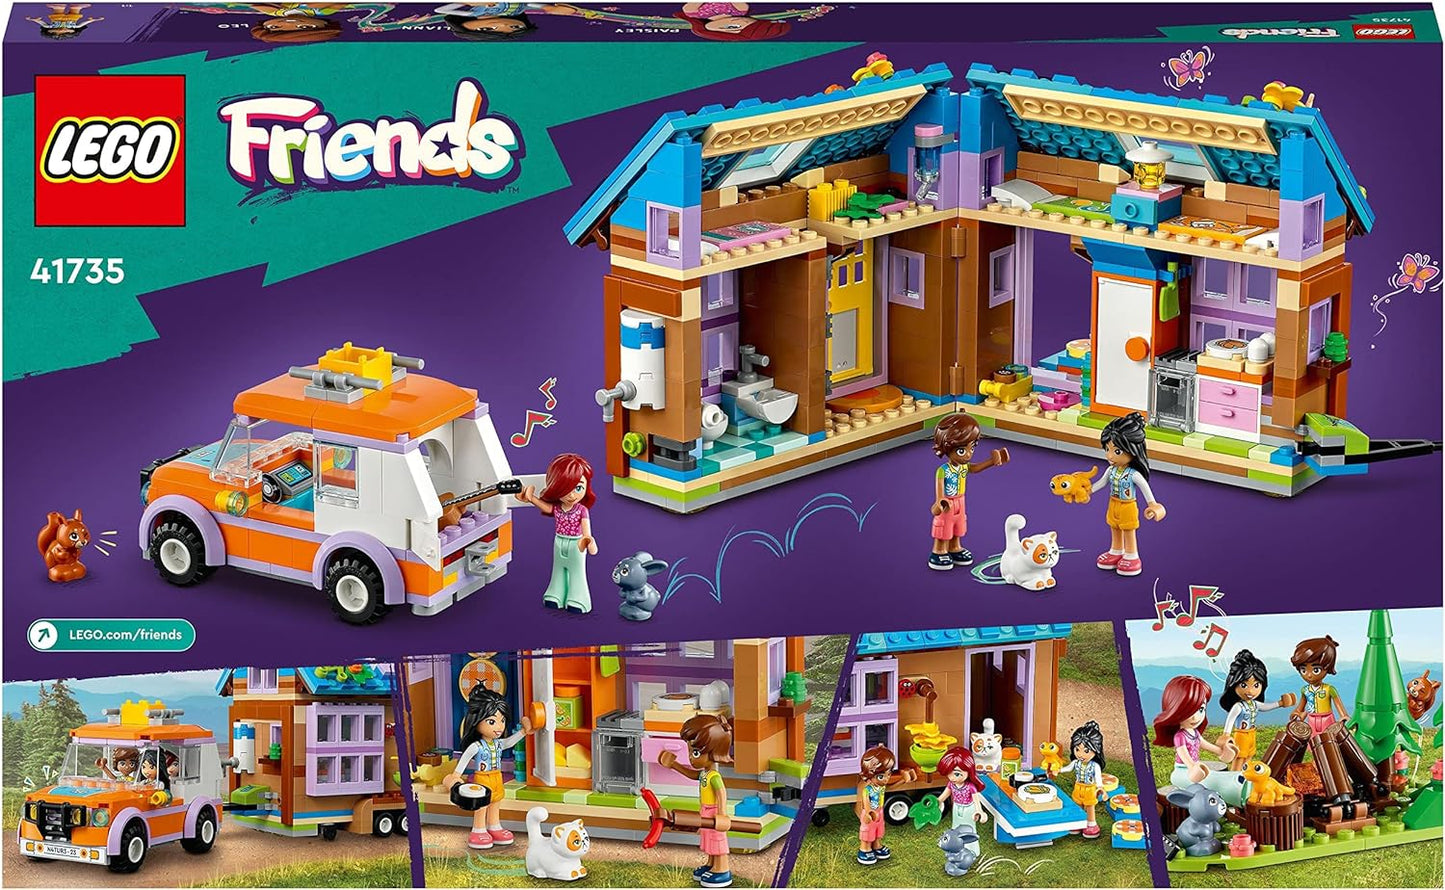 LEGO Friends 41735 Portable Little House Toy Blocks, Present, Pretend Play, Home, Girls, Ages 7 and Up